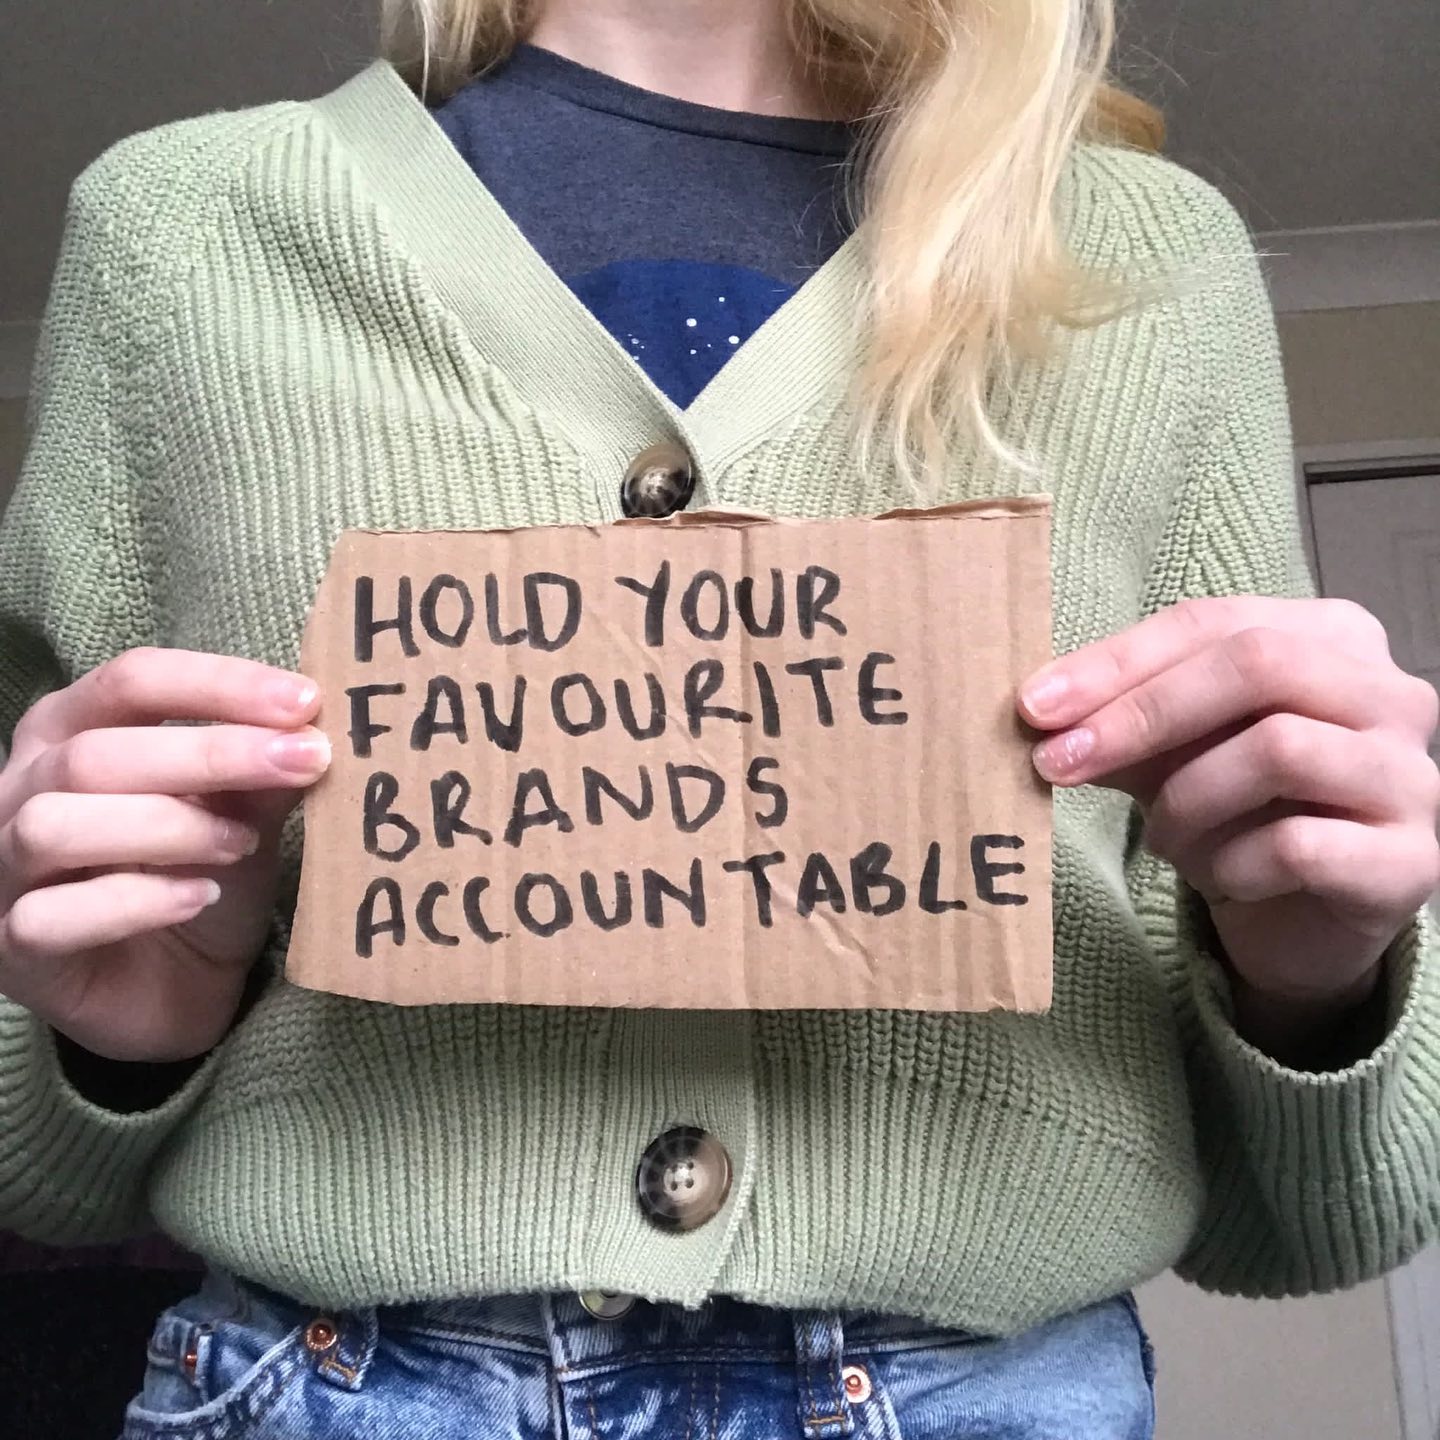 ✨DAY 4 COMPETITION✨

We can shop more ethically by making smart choices about the clothing brands that we support, and holding fashion brands accountable for their sustainable actions. Or lack thereof! 

📲 Follow the link in our bio, and go to the ‘Community’ tab, to read our post on holding your favourite brands accountable! 

We want to give you PRIZES to help make this change happen! All you have to do is follow the steps below for a chance to WIN! 🏆

PRIZE= Reusable kitchen towel @hnyco_ecoshop 🗞 

Here’s how to enter:
- Like this post 
- Follow this account @uw_sustain 
- Tag 1 friend 
👍🏼

You will automatically be entered into our prize draw. Unlimited entries, follow the above steps again. Each time is a new entry. 

Entries close midday on Wednesday 5th January 

#UniversityofWorcester #sustainablefashion #sustainability #catcc #fastfashion